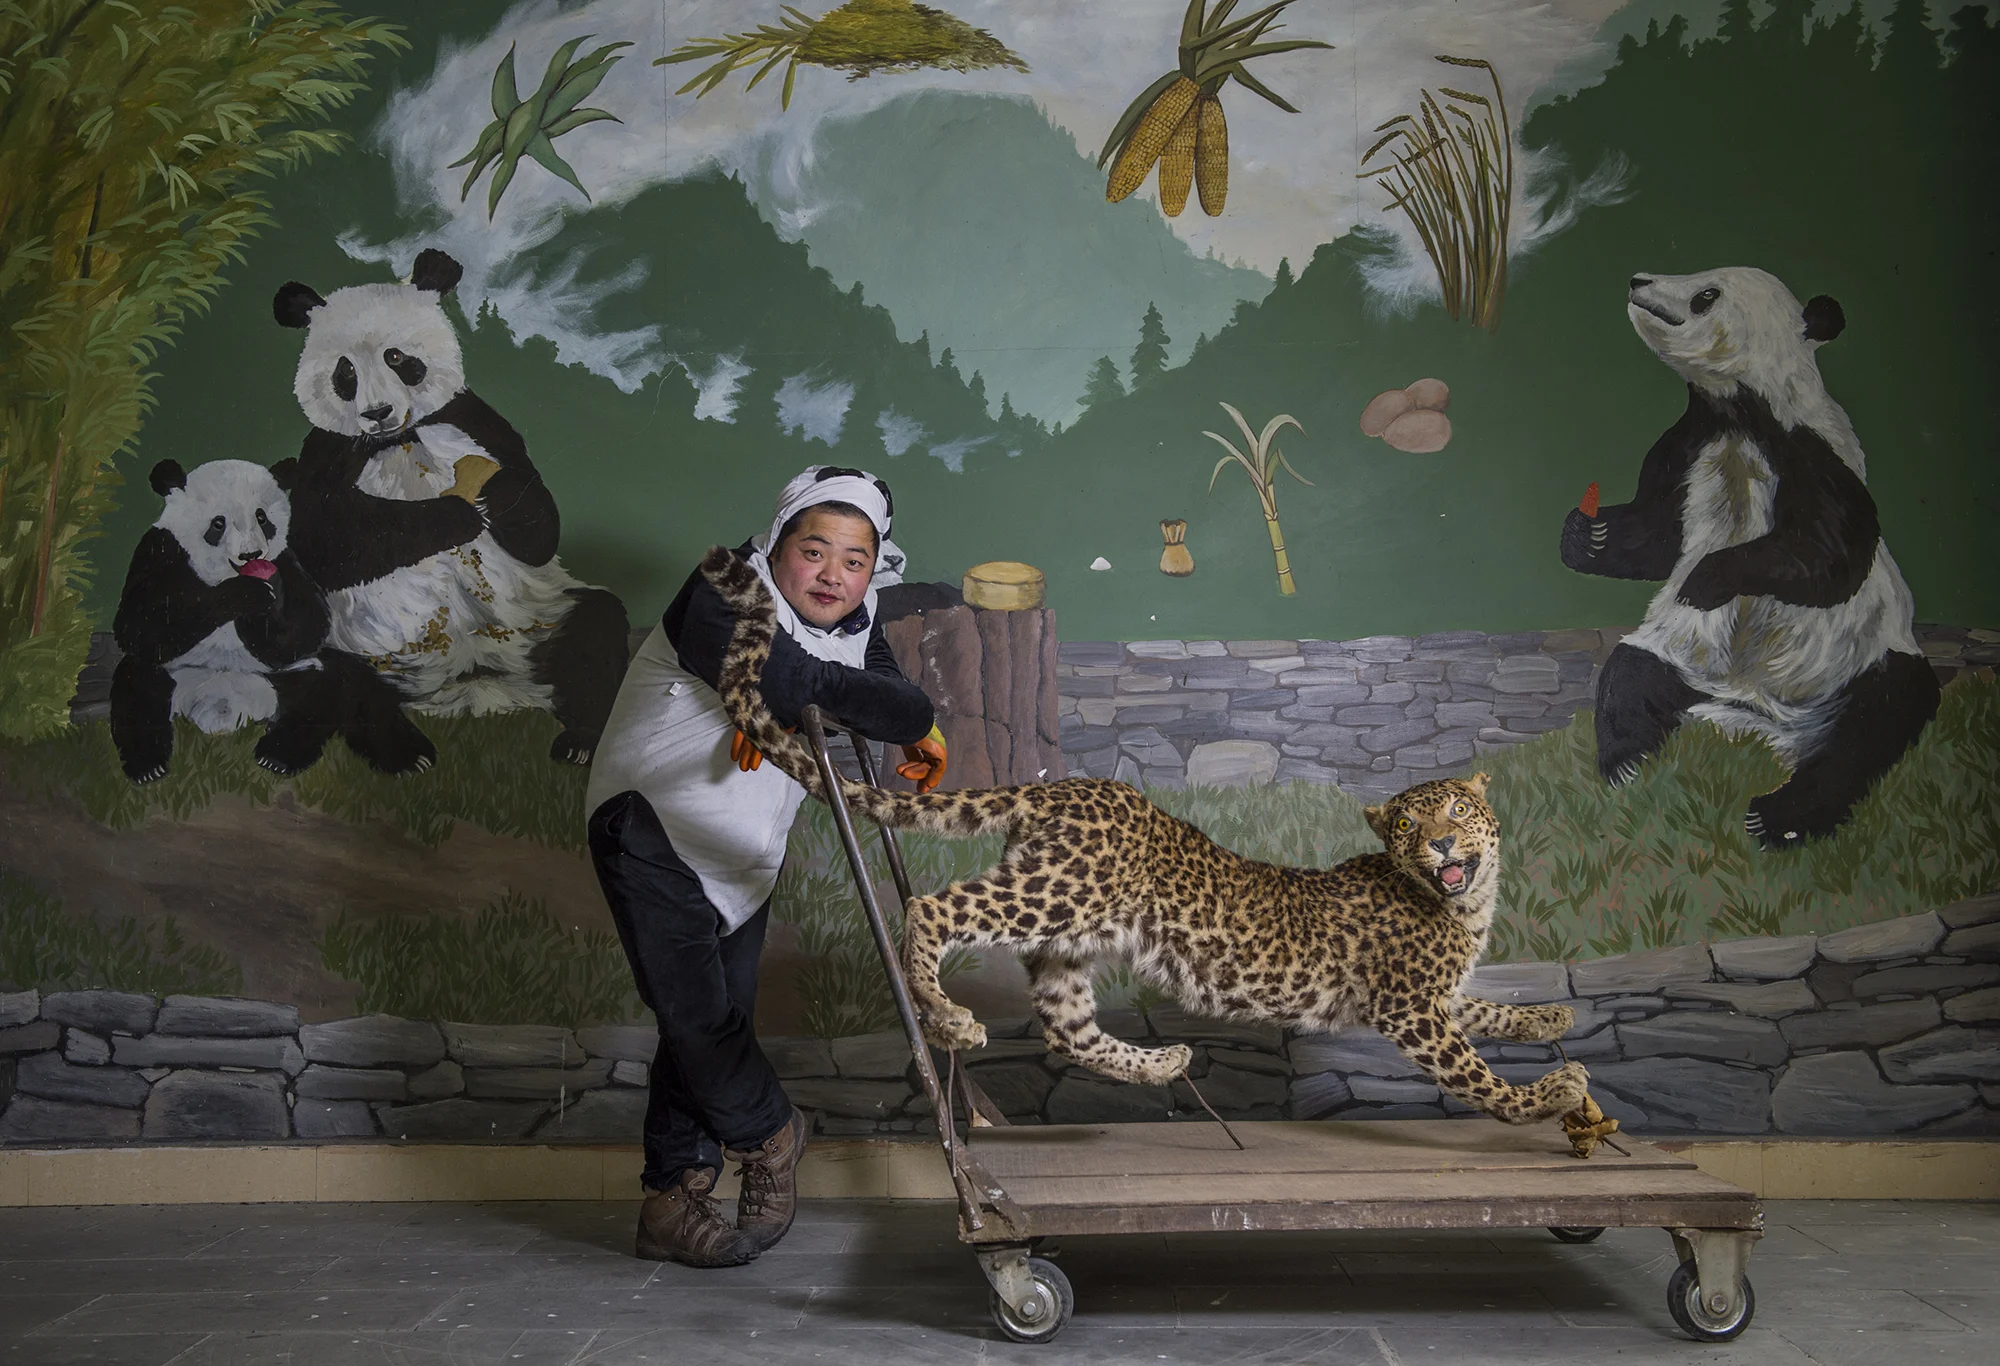 Gao Xiao Wen poses for portraits at the Wolong China Conservation and Research Center for the Giant Panda in Sichuan province, China.